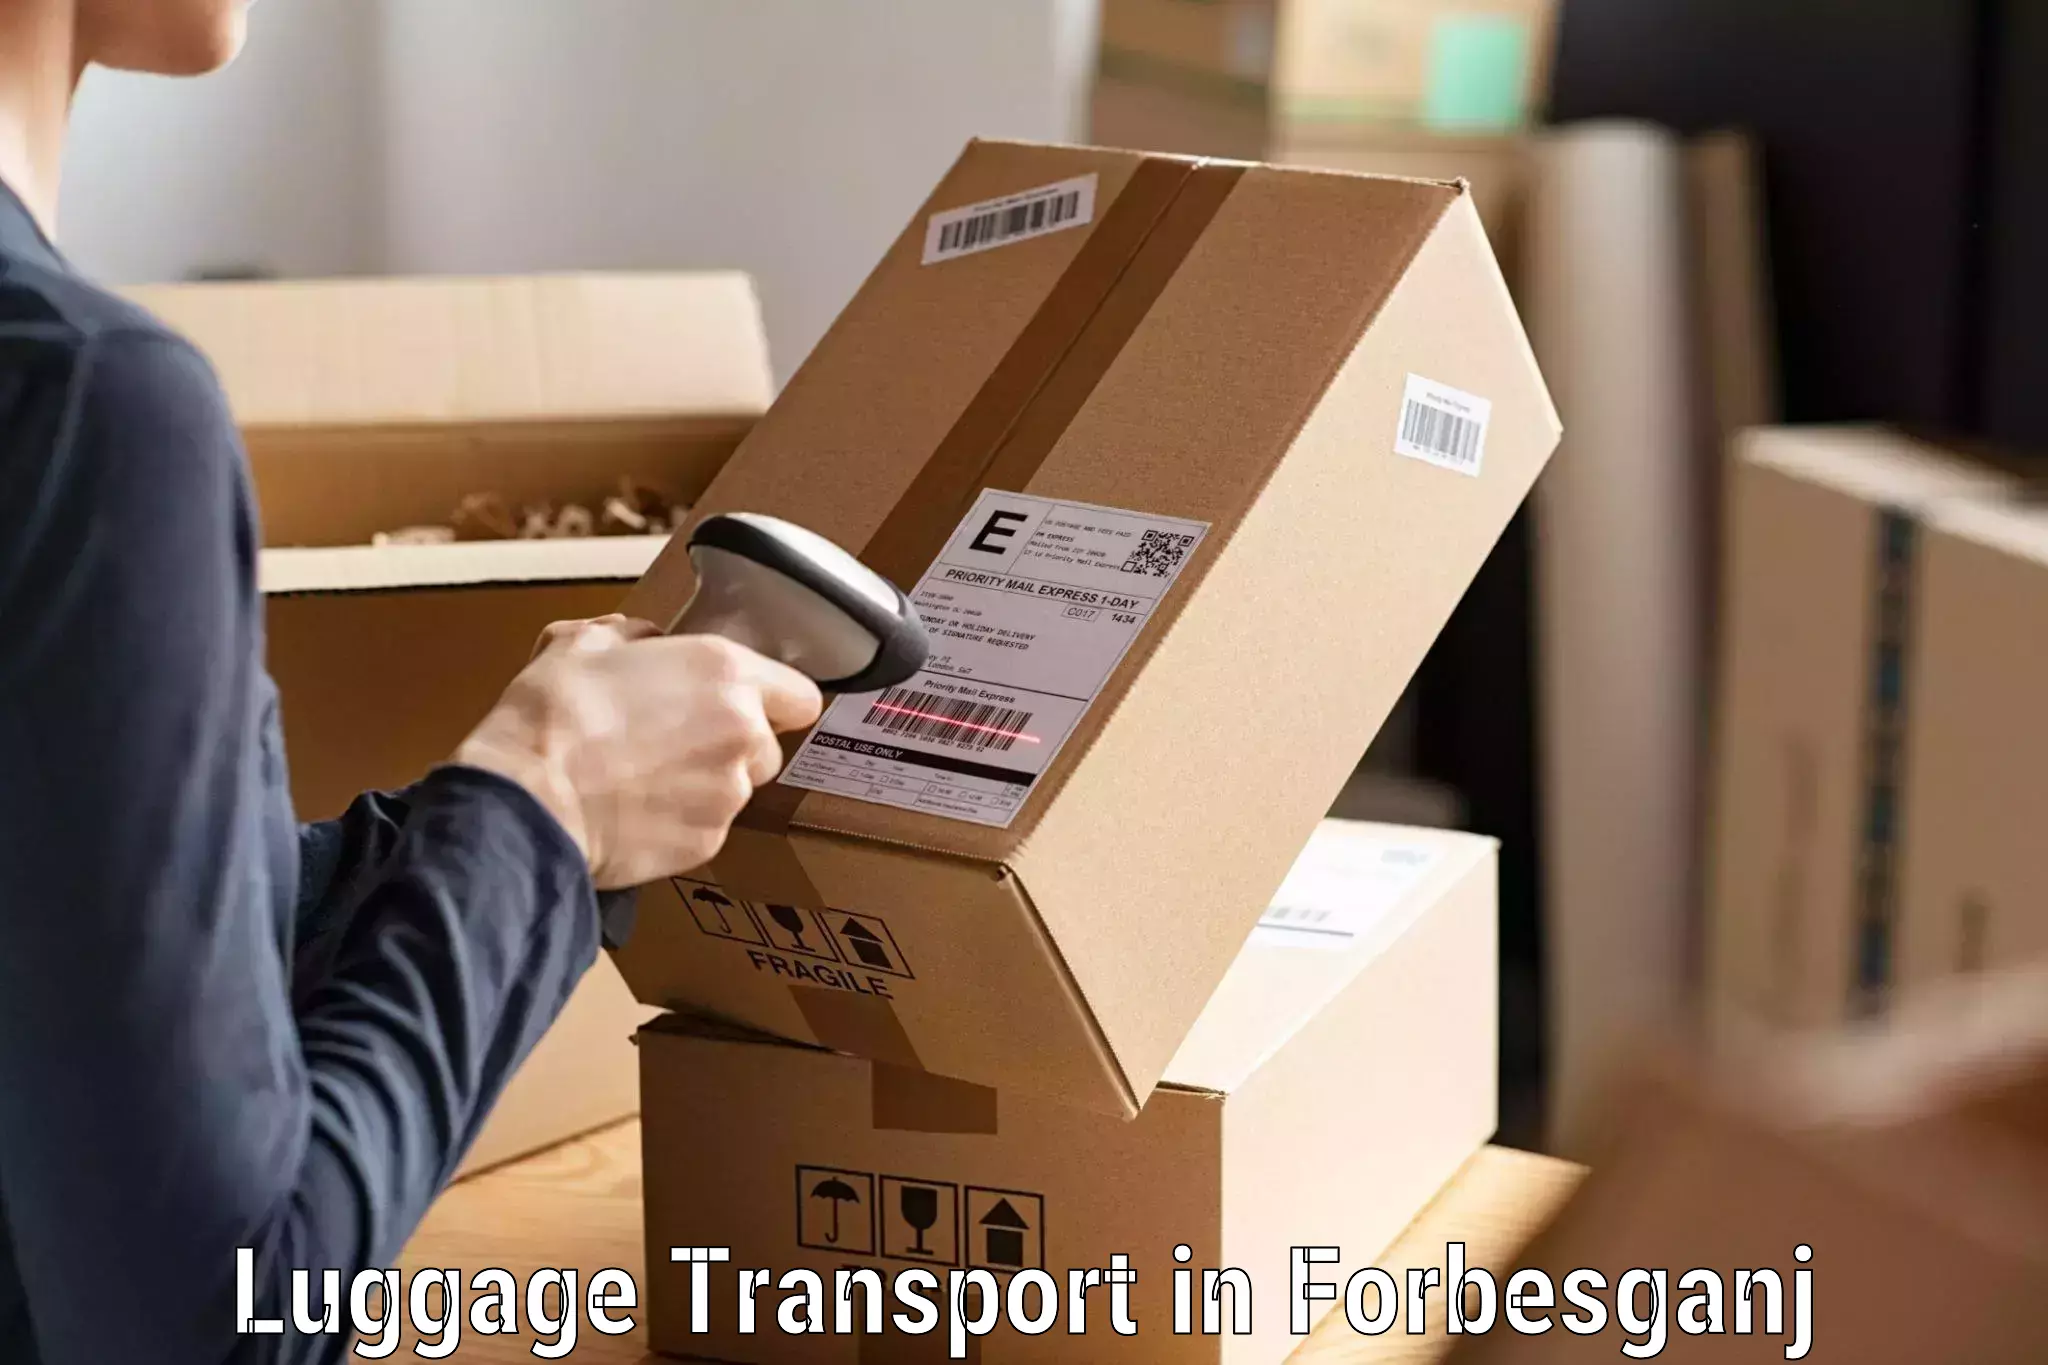 Luggage shipping planner in Forbesganj